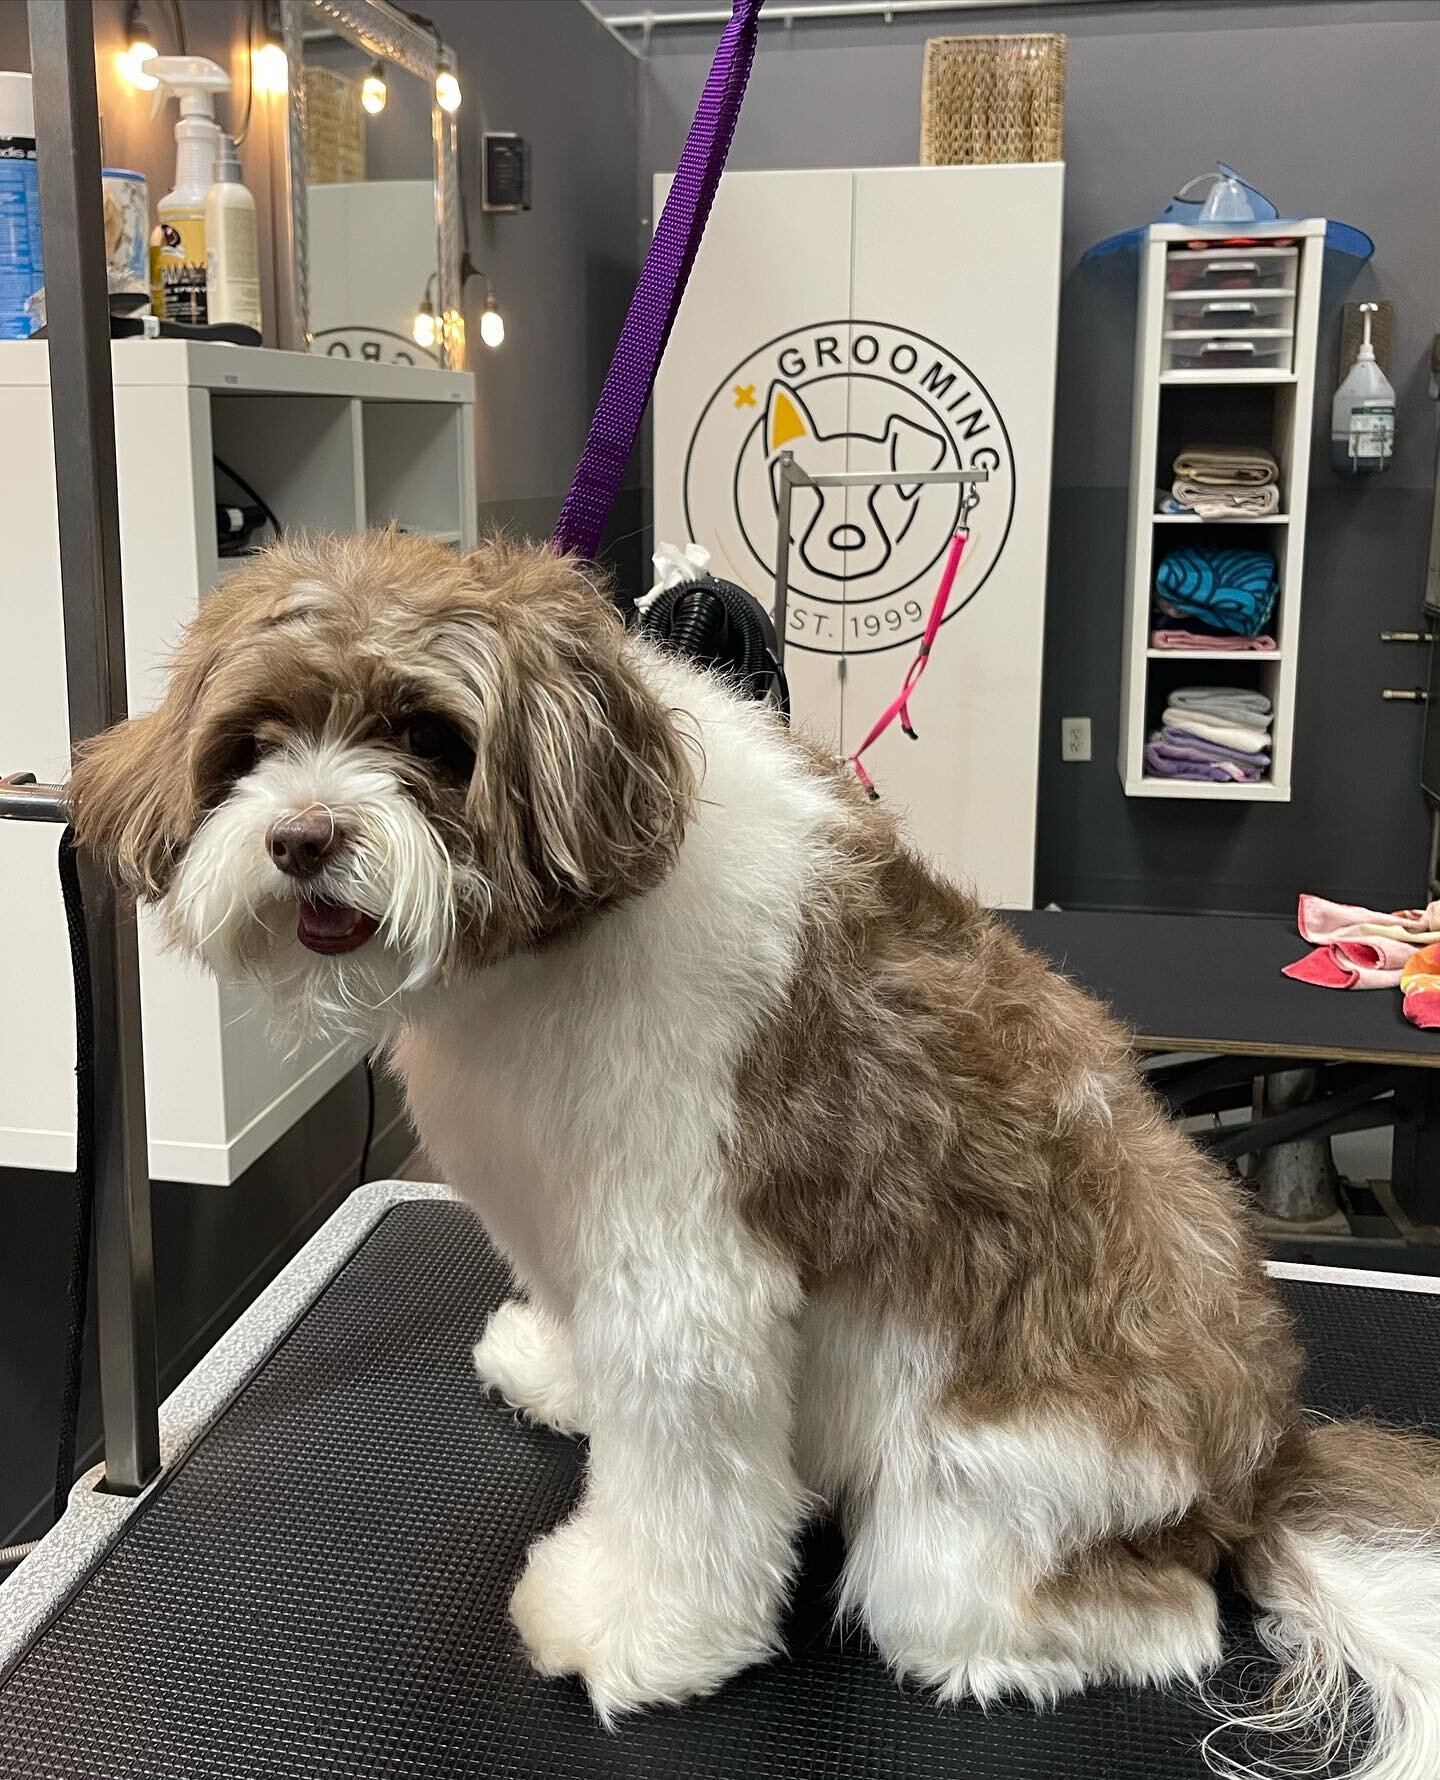 Time for a spring clean up? We have grooming appointments available next week! Give us a call at 703-931-5057 to book your appointment and get your pup feeling fresh as a daisy! 🌼

#doggrooming #doggroomer #grooming #groomingsalon #dogspa #spawday #